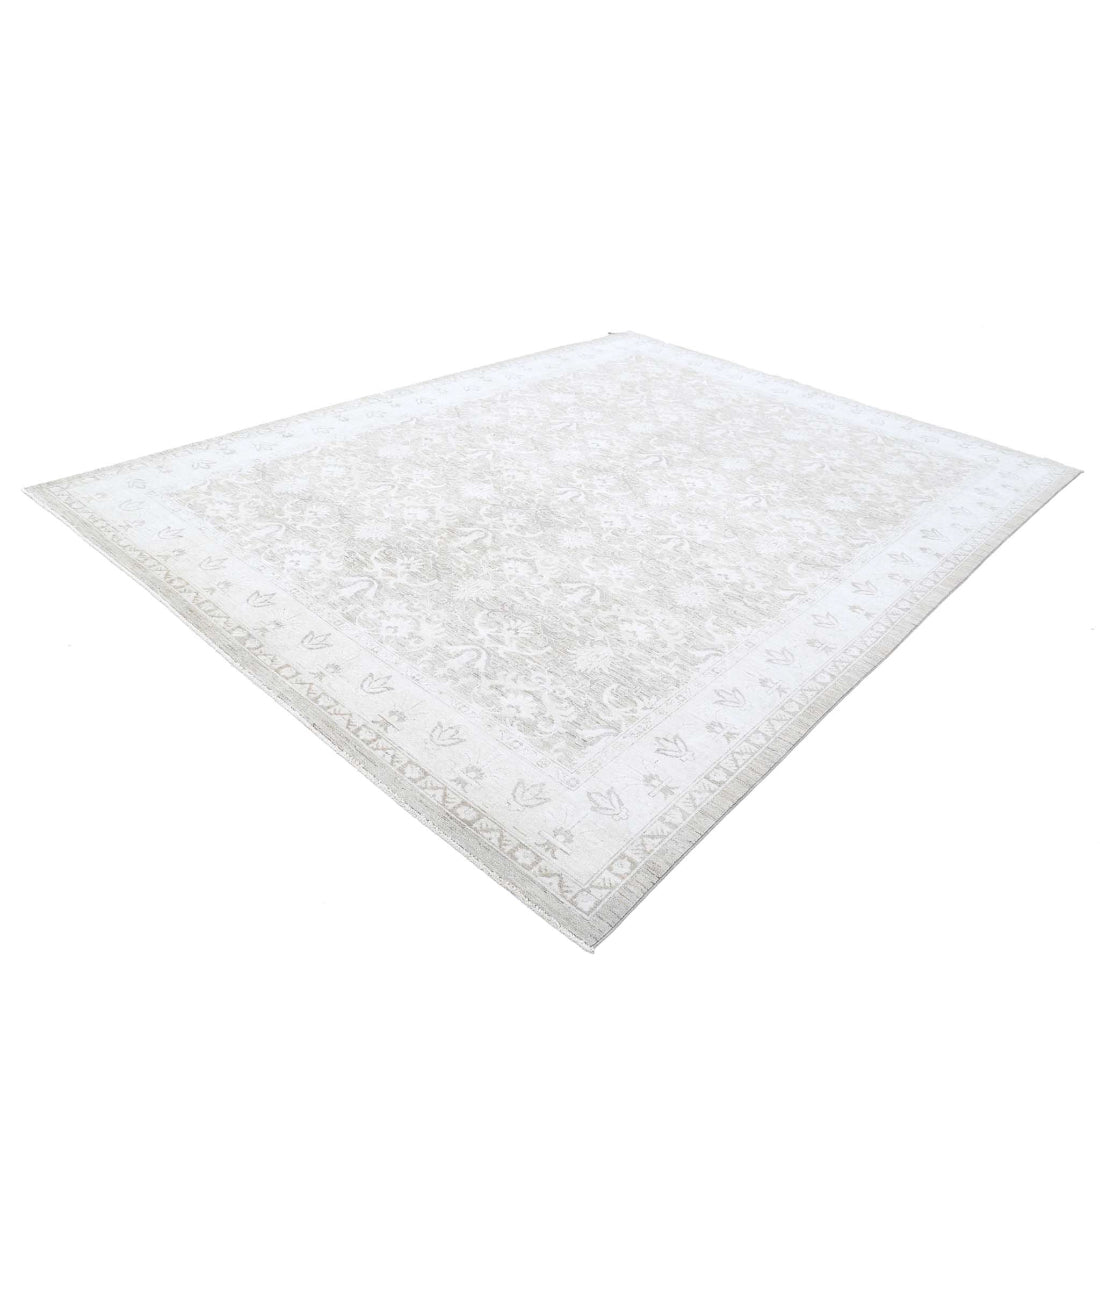 Serenity 8'9'' X 11'8'' Hand-Knotted Wool Rug 8'9'' x 11'8'' (263 X 350) / Taupe / Ivory